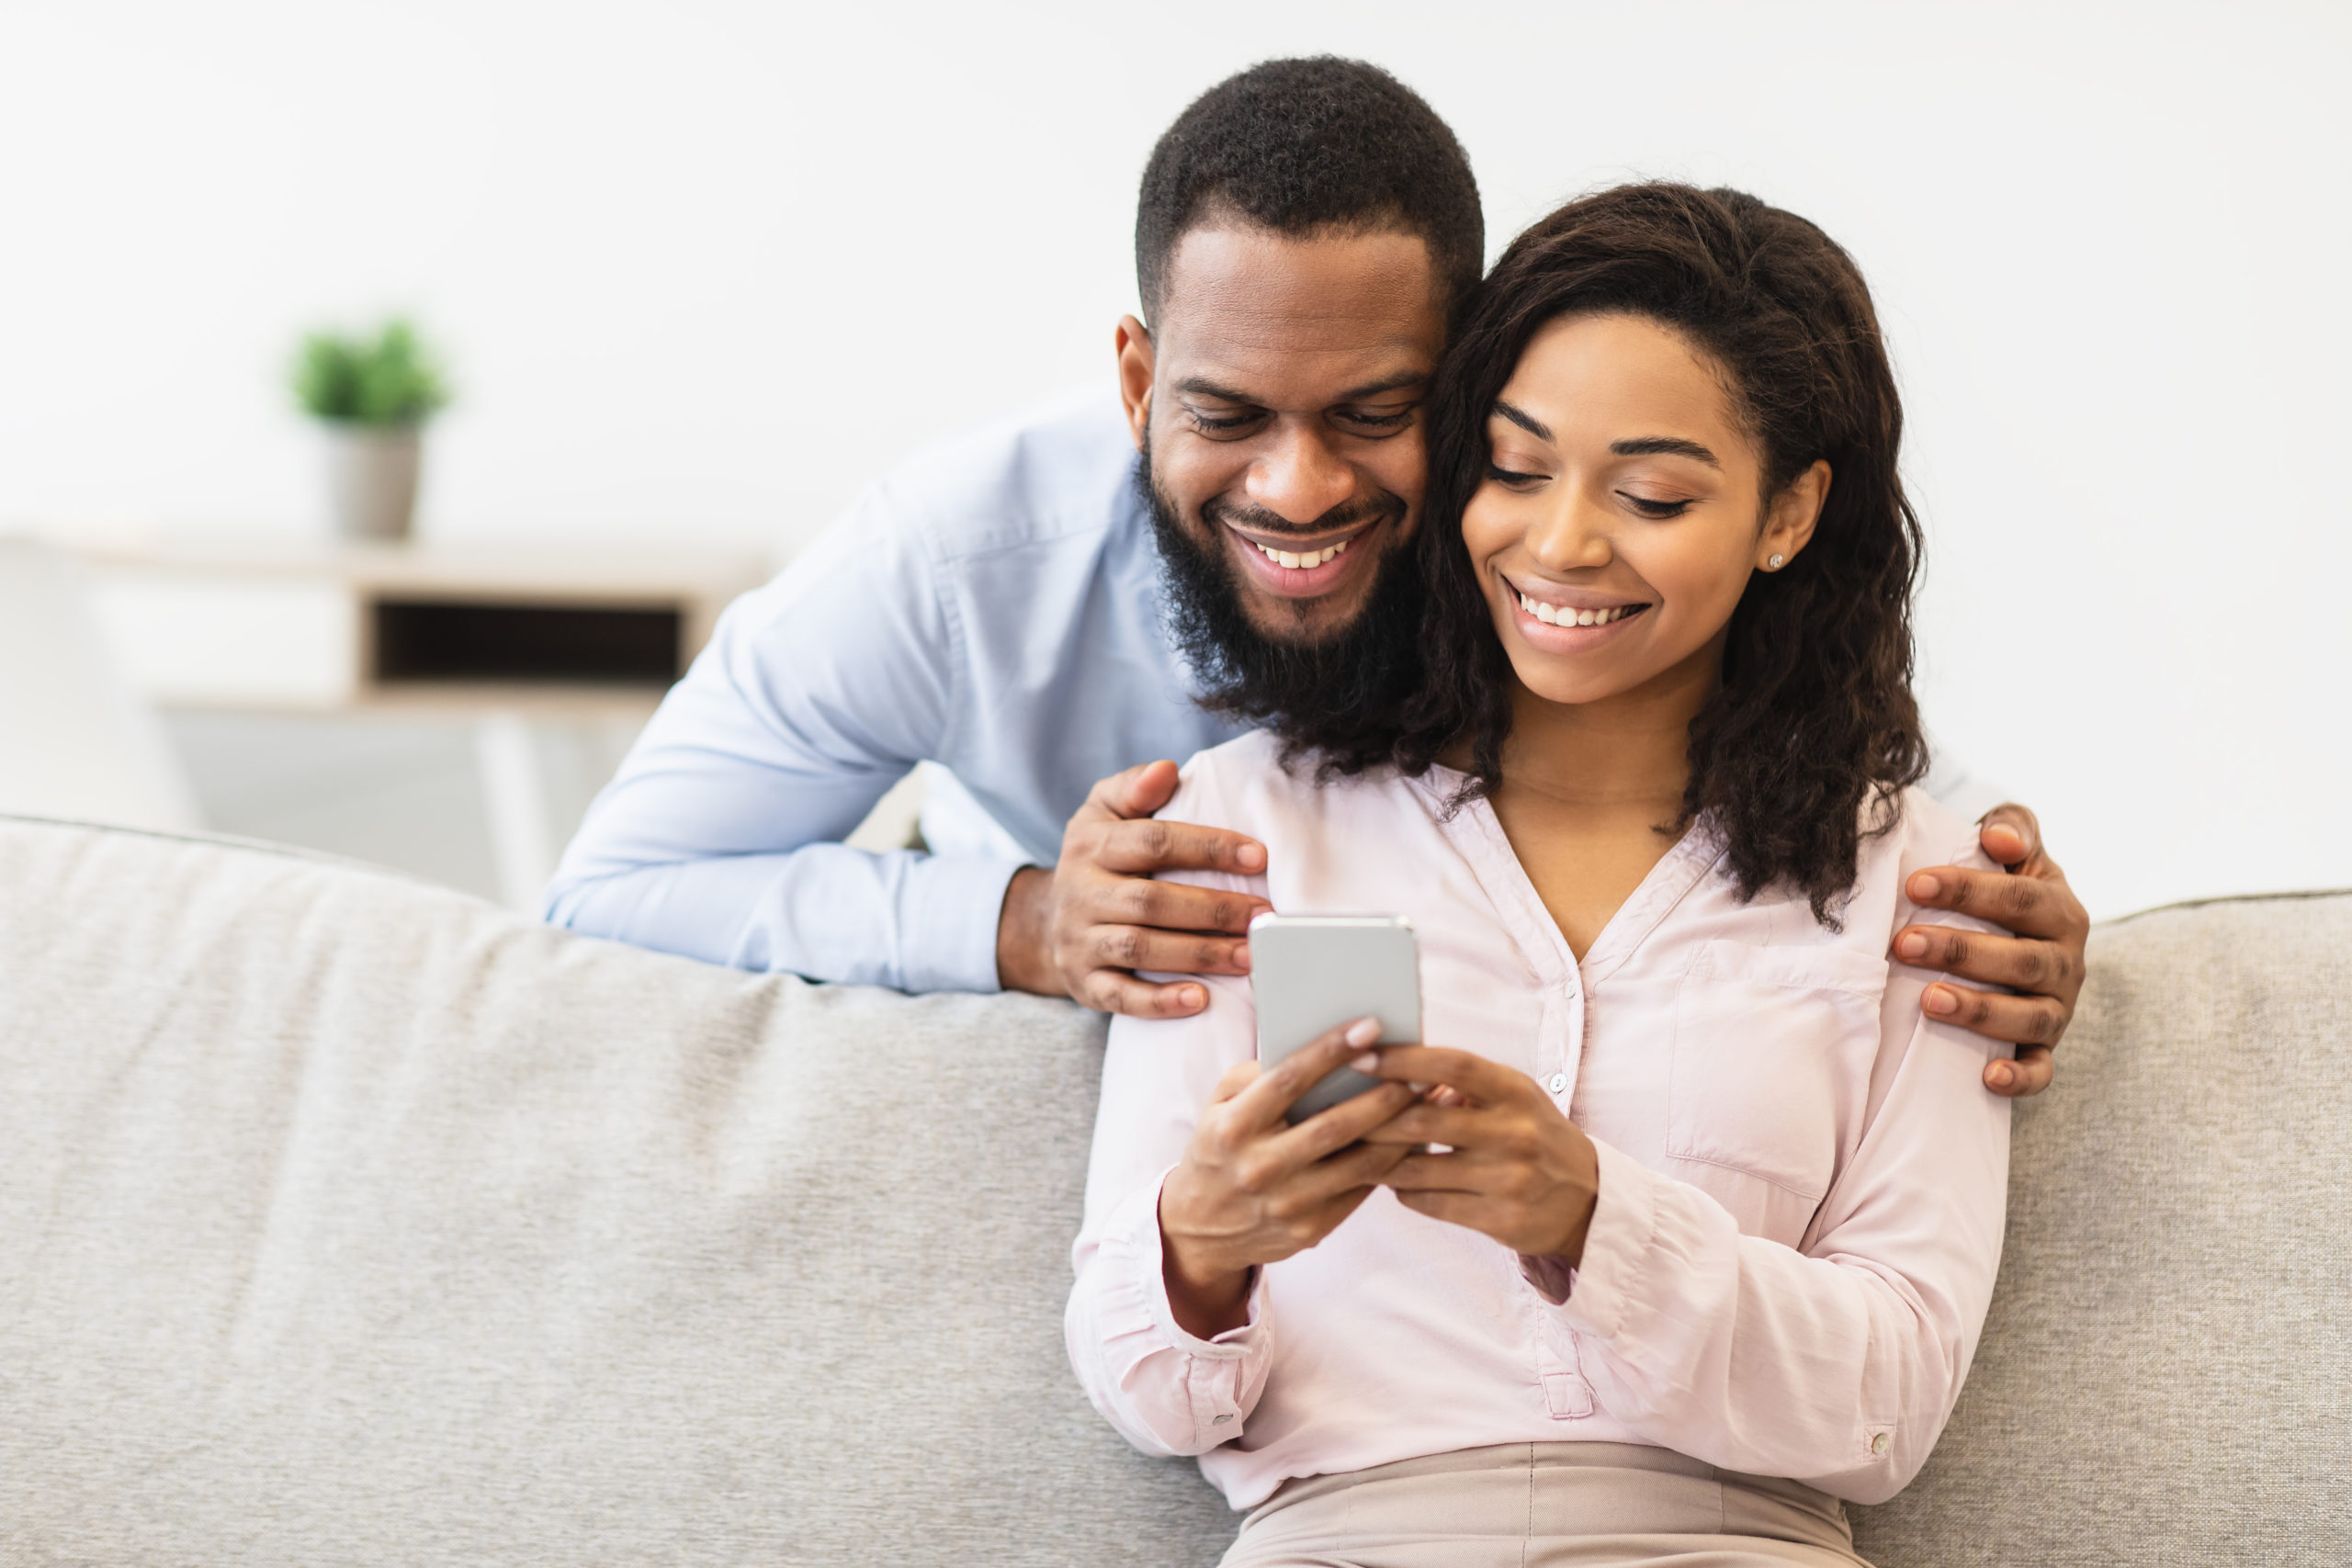 How Qube Money Helps Couples Budget Better - The Qube Money Blog